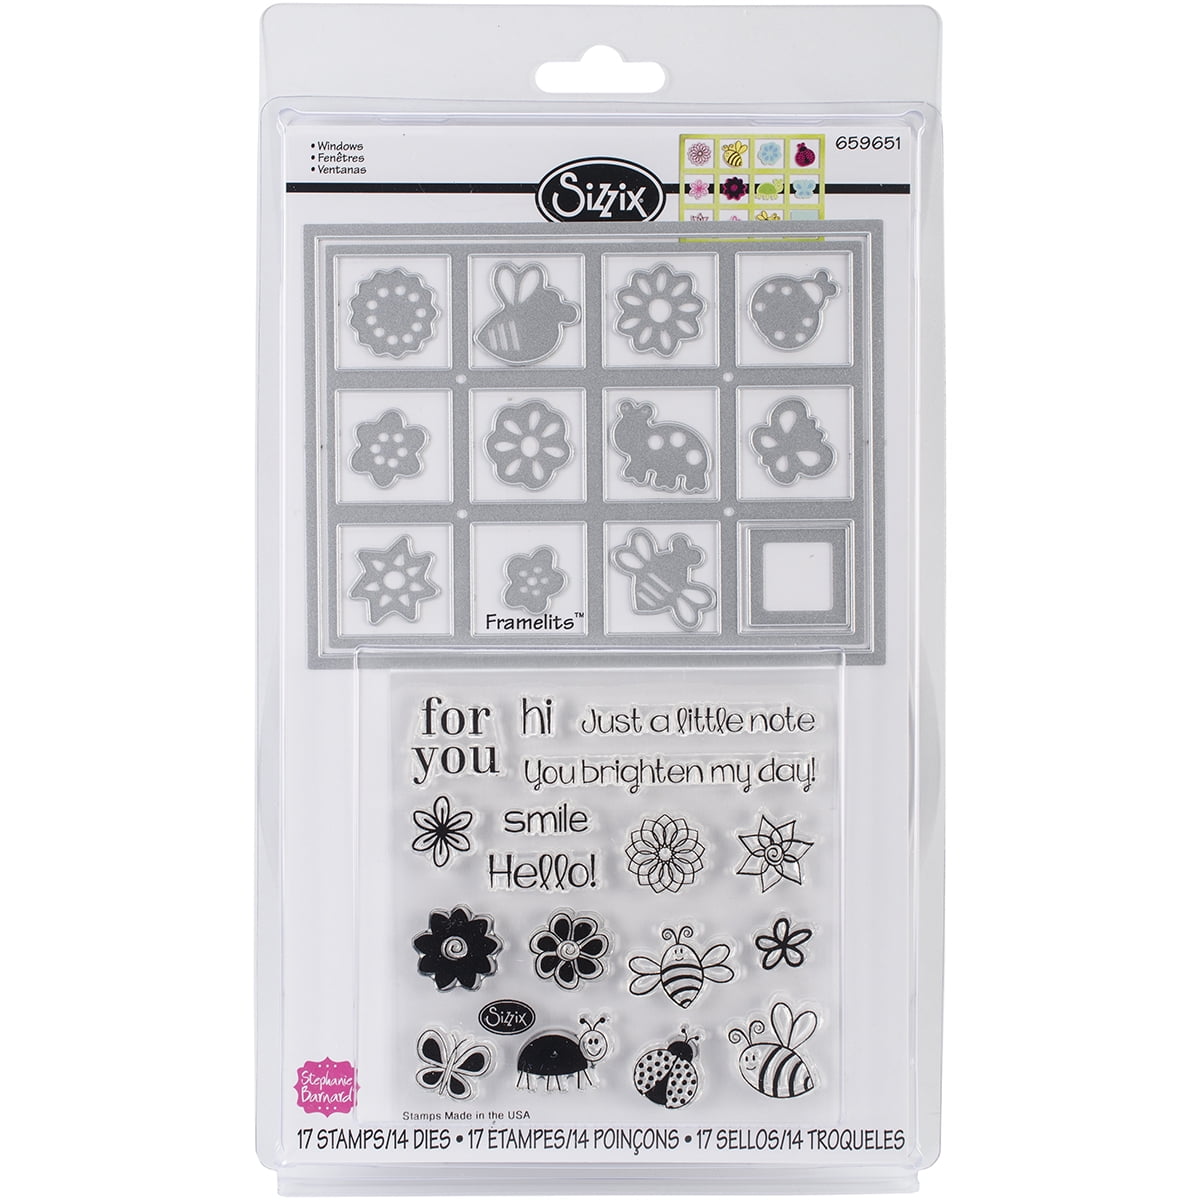 Sizzix Journal Stamps 35PK - Clear Stamps Set